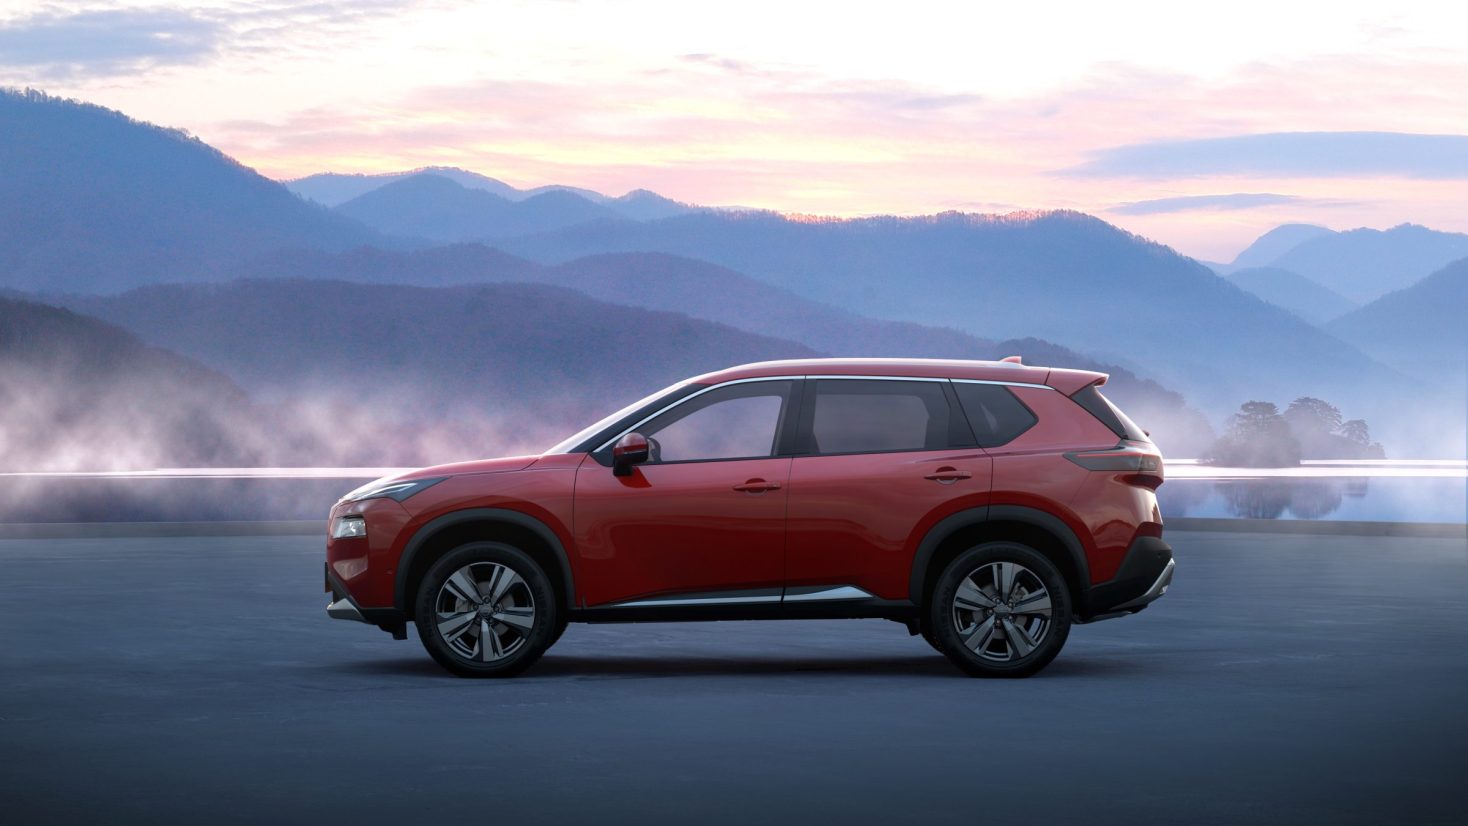 Get Behind the Wheel of an Affordable Brand New Compact SUV